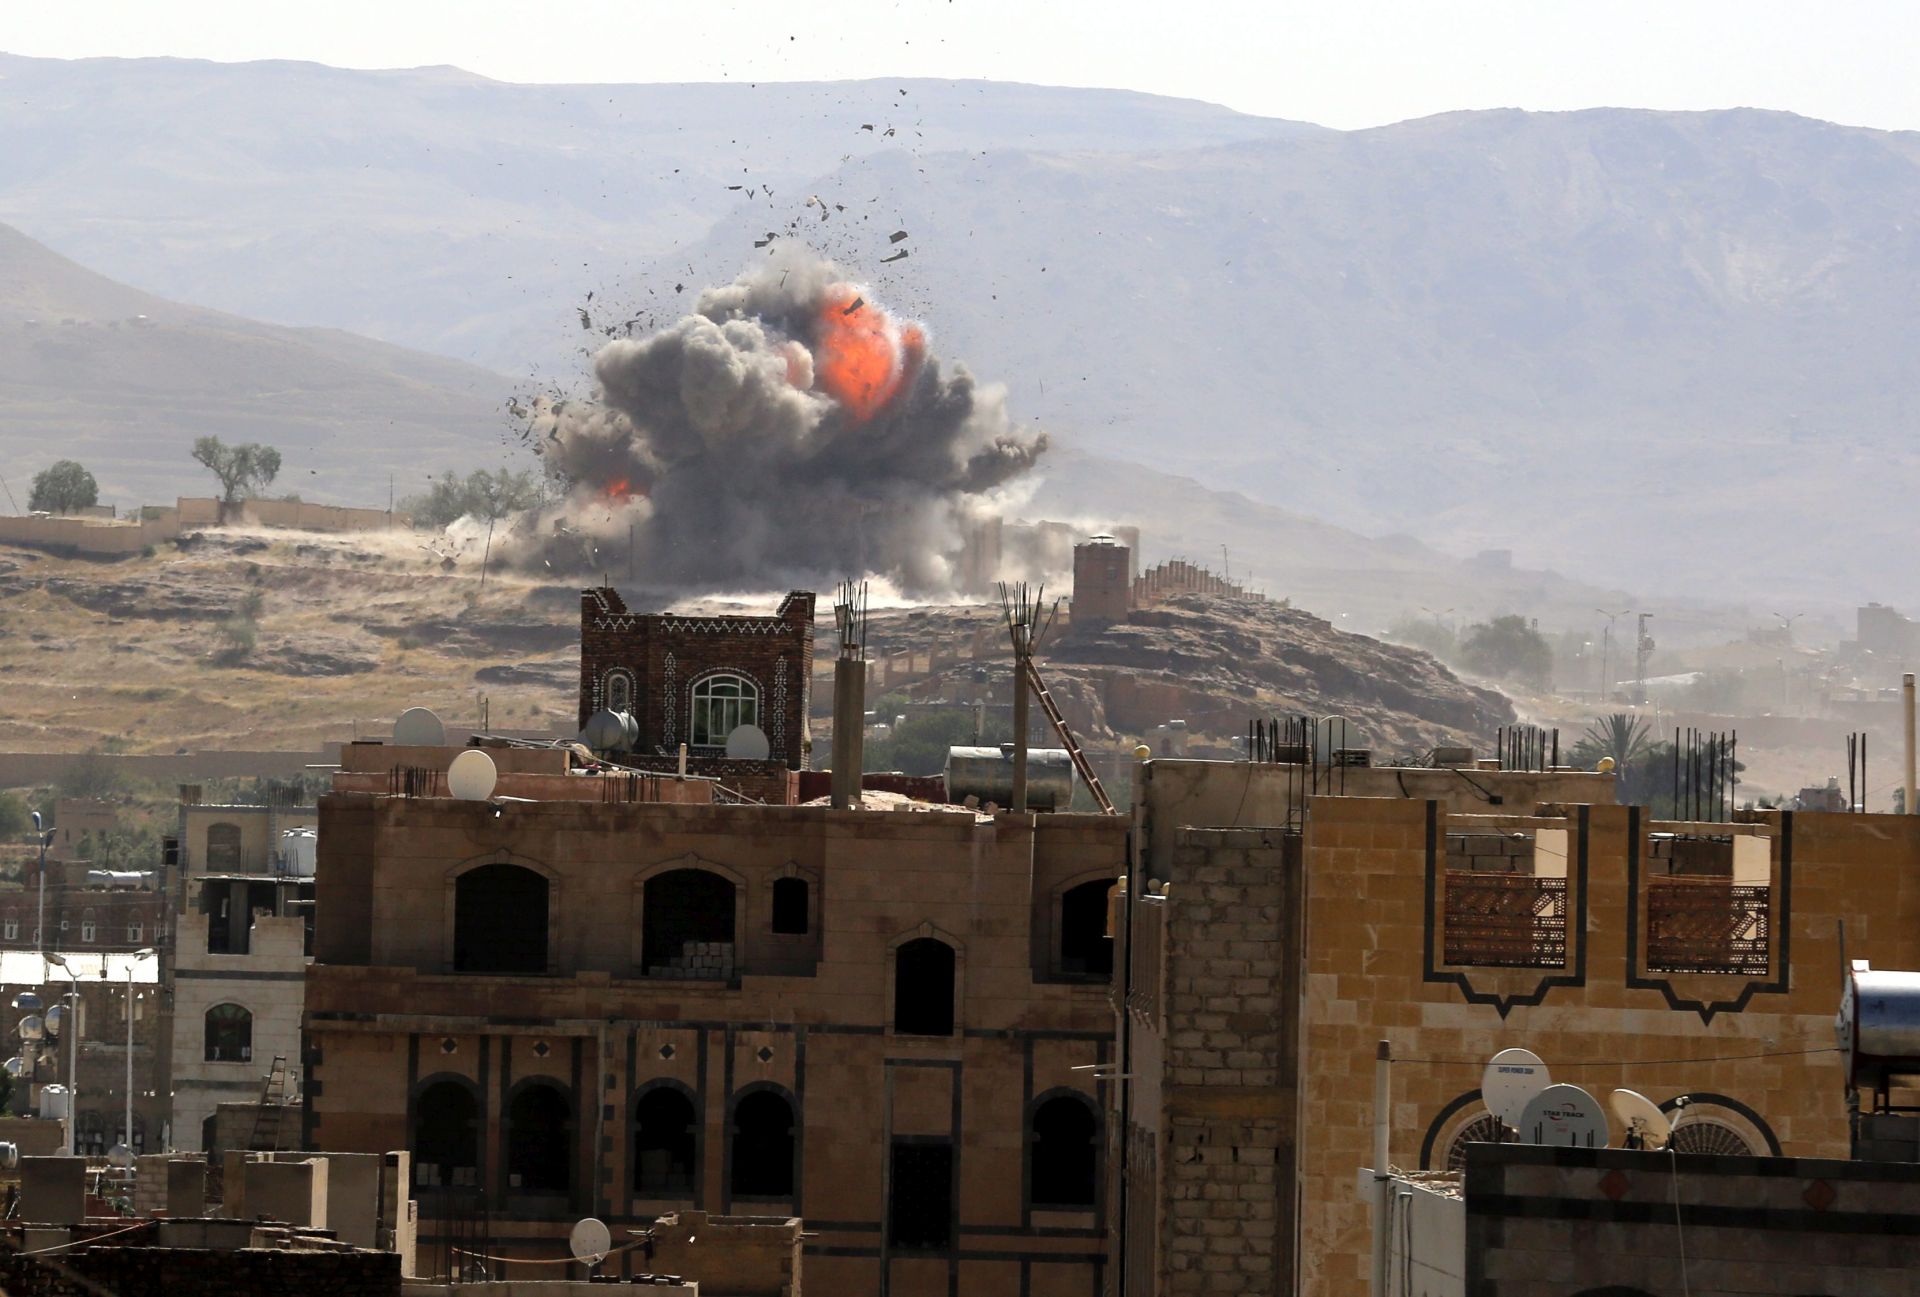 epa05555137 Smokes and balls of fire rise from an alleged Houthi-held military position after it was hit by a Saudi-led air strike in Sana'a, Yemen, 25 September 2016. According to reports, the Saudi-led military coalition has been incessantly pounding Houthi rebels-positions across Yemen since March 2015 to reinstate the internationally-recognized government of Yemeni President Abdo Rabbo Mansour Hadi.  EPA/YAHYA ARHAB